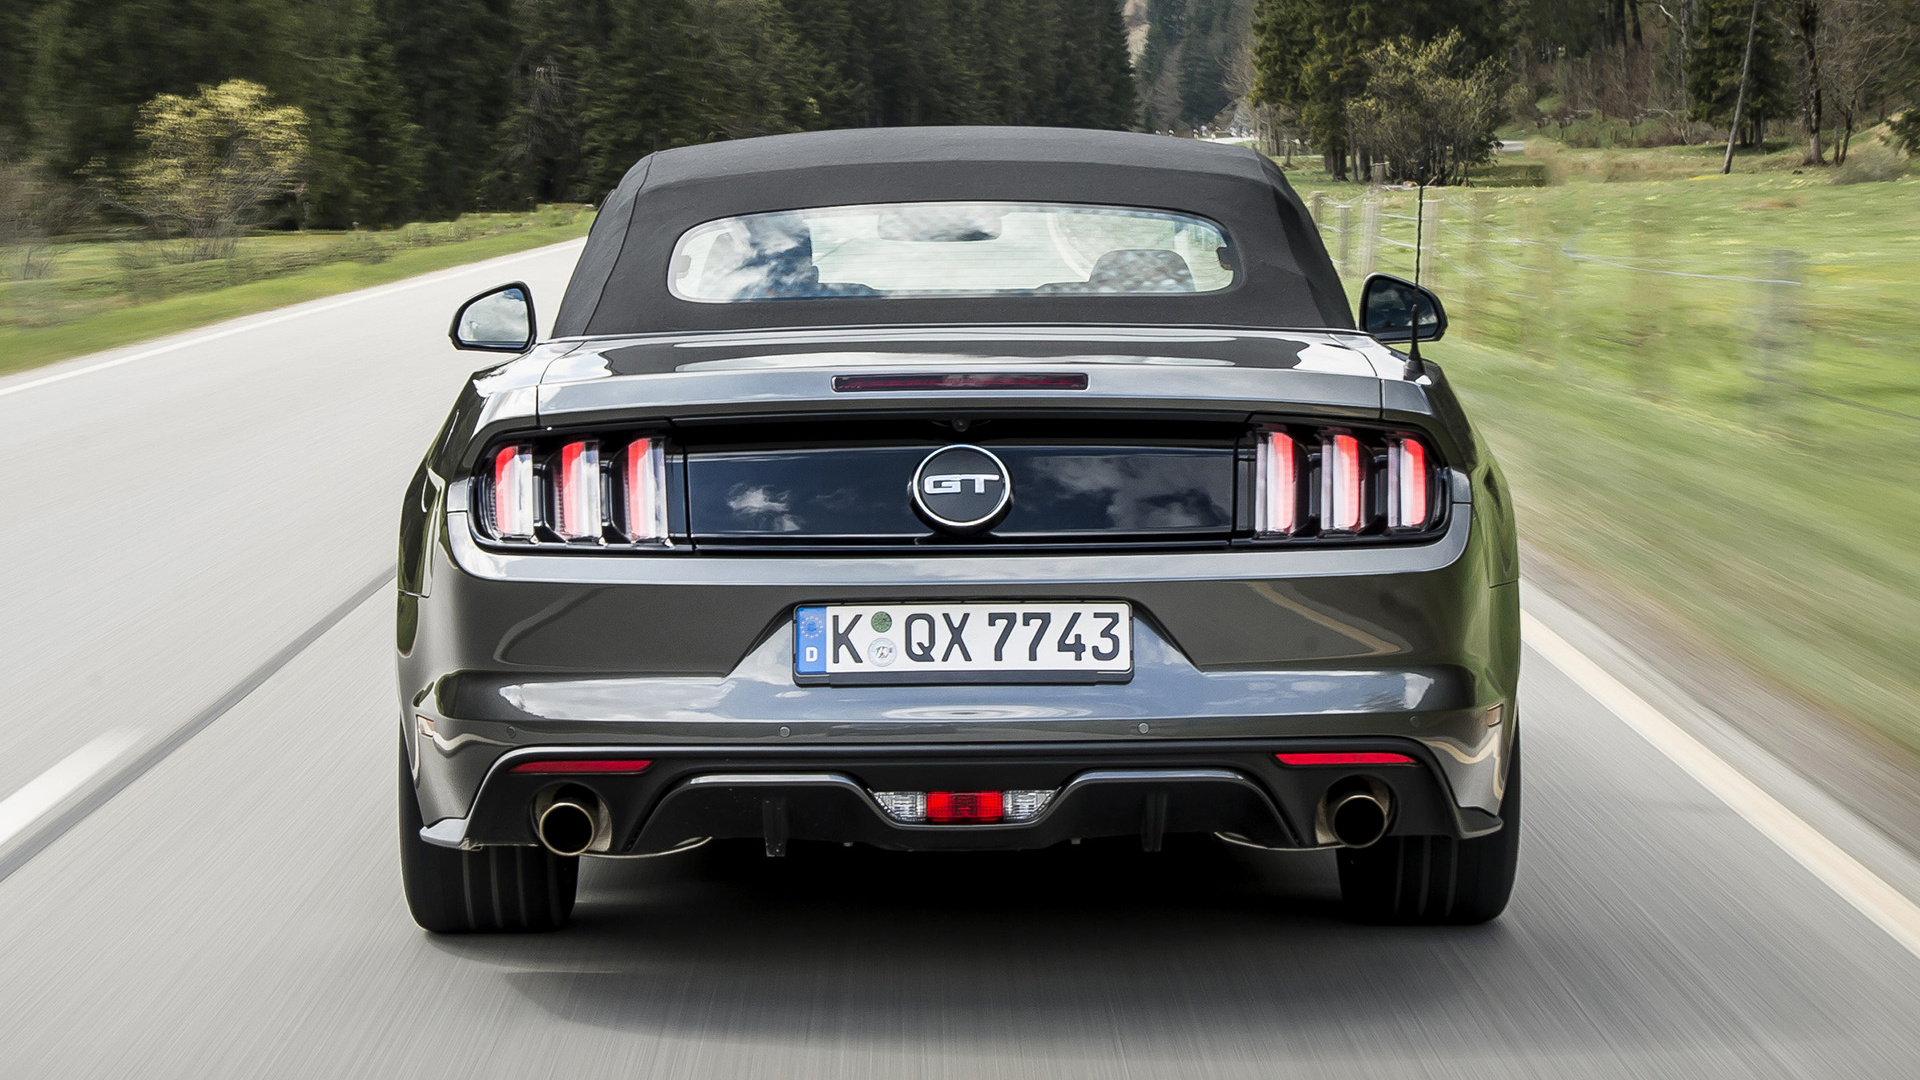 2015 Ford Mustang GT Convertible (EU) - Wallpapers and HD Images | Car ...